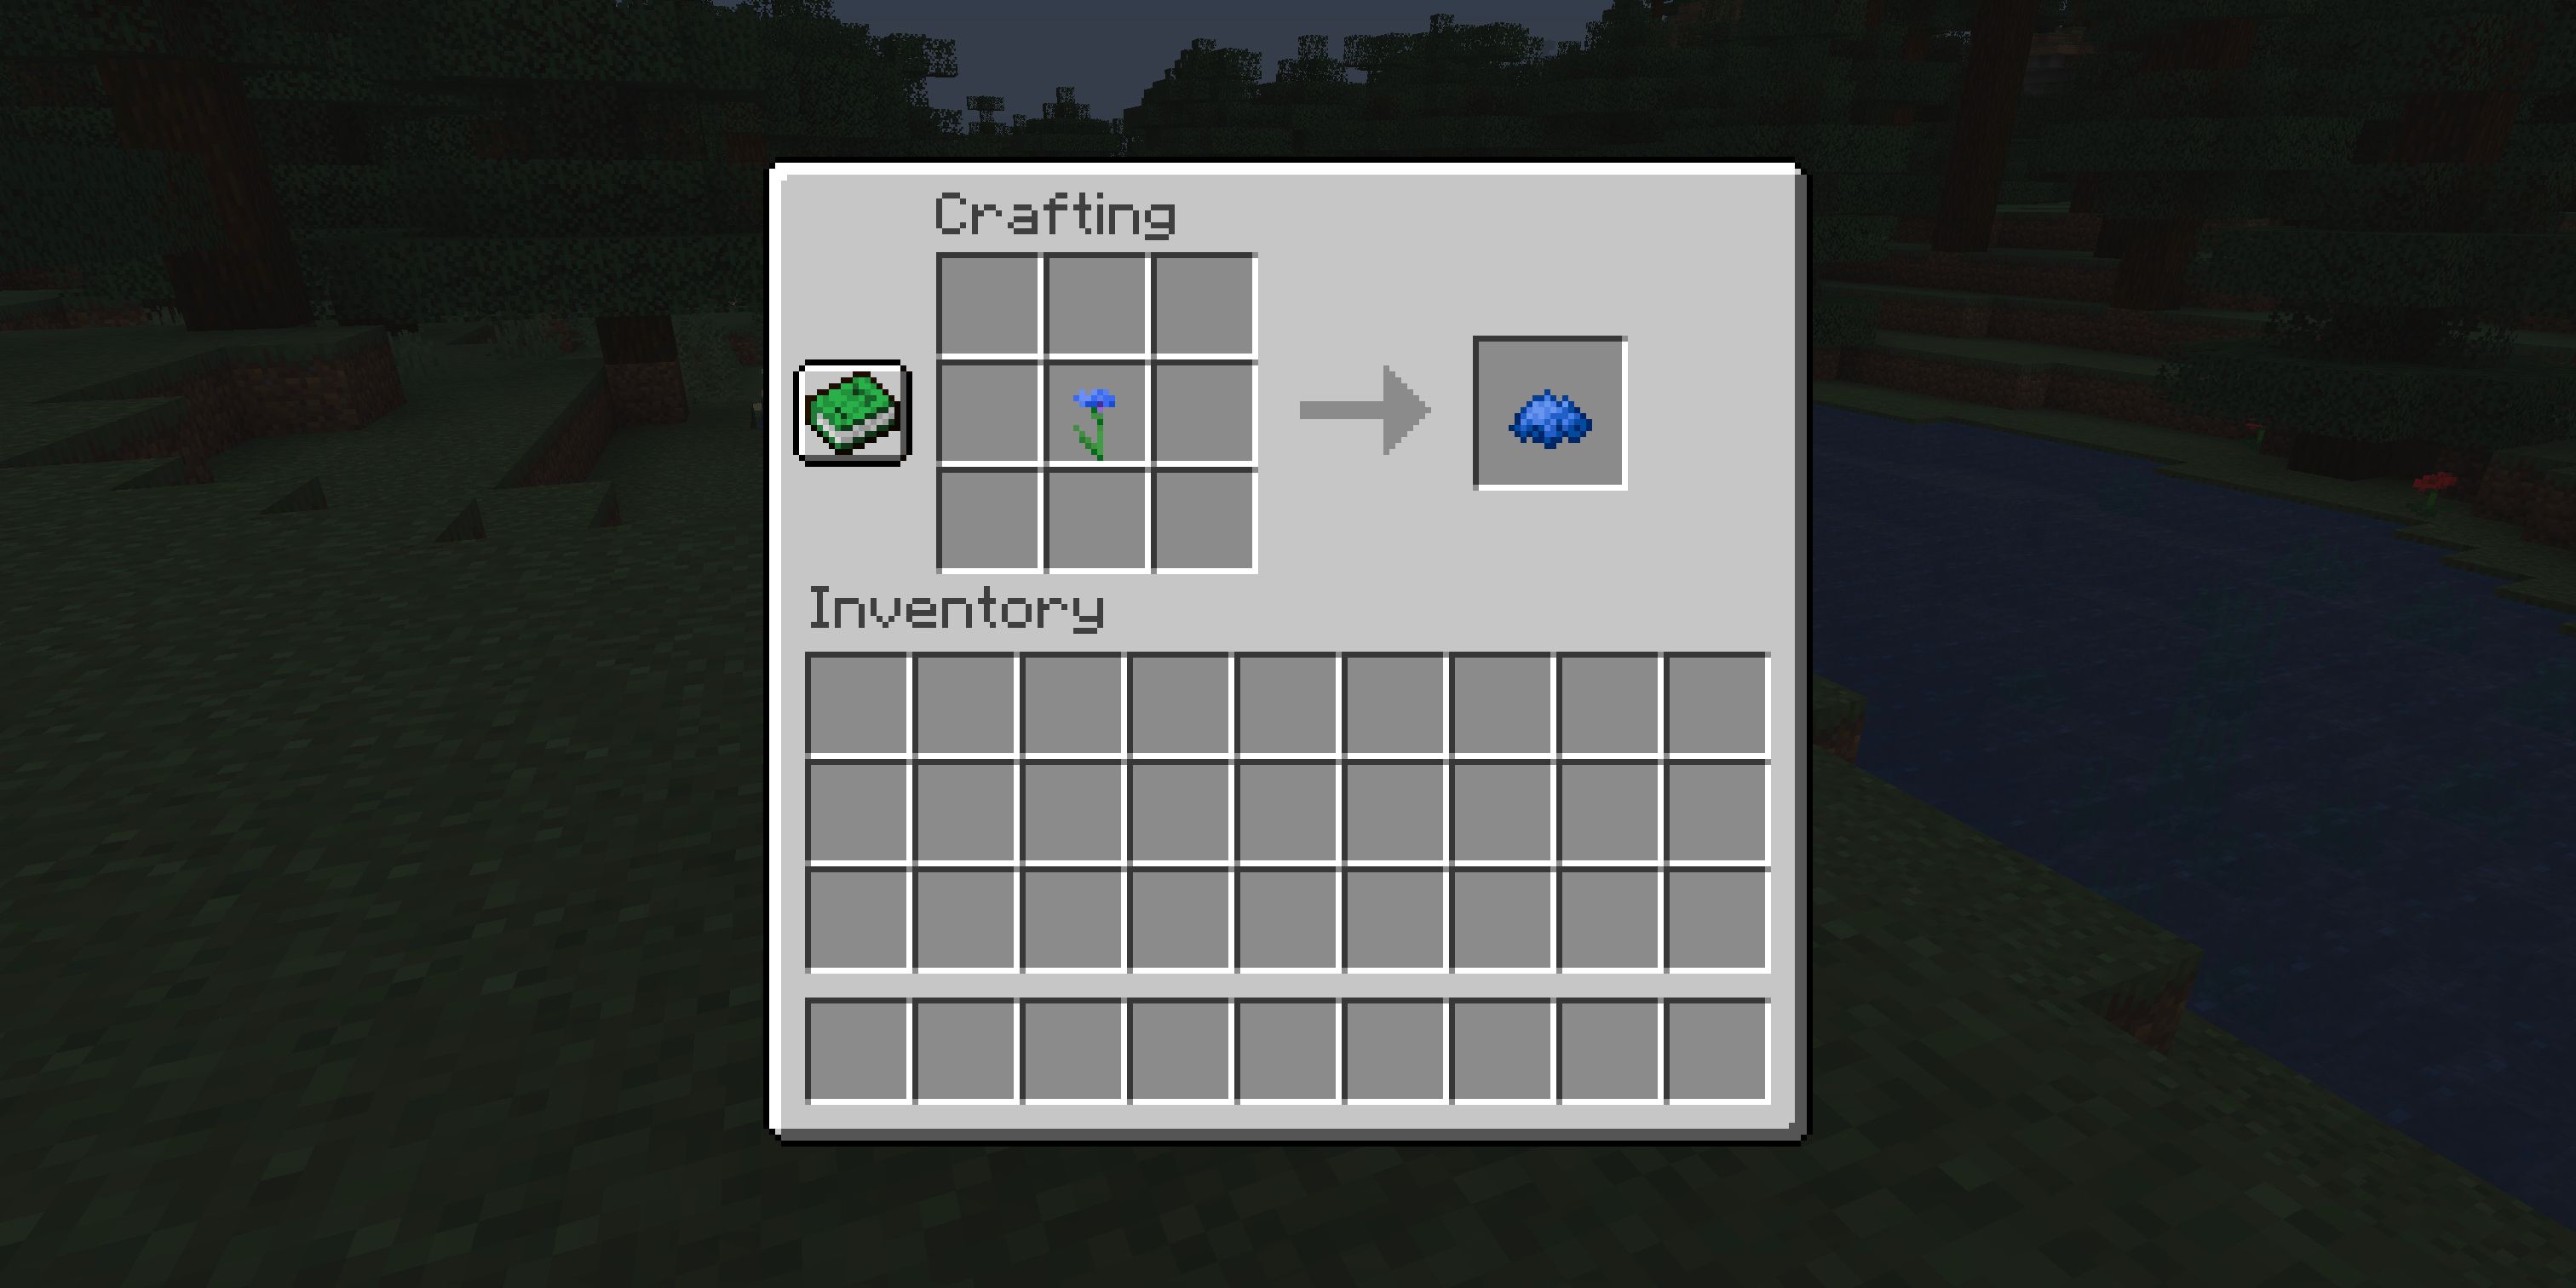 The crafting recipe for blue dye in Minecraft